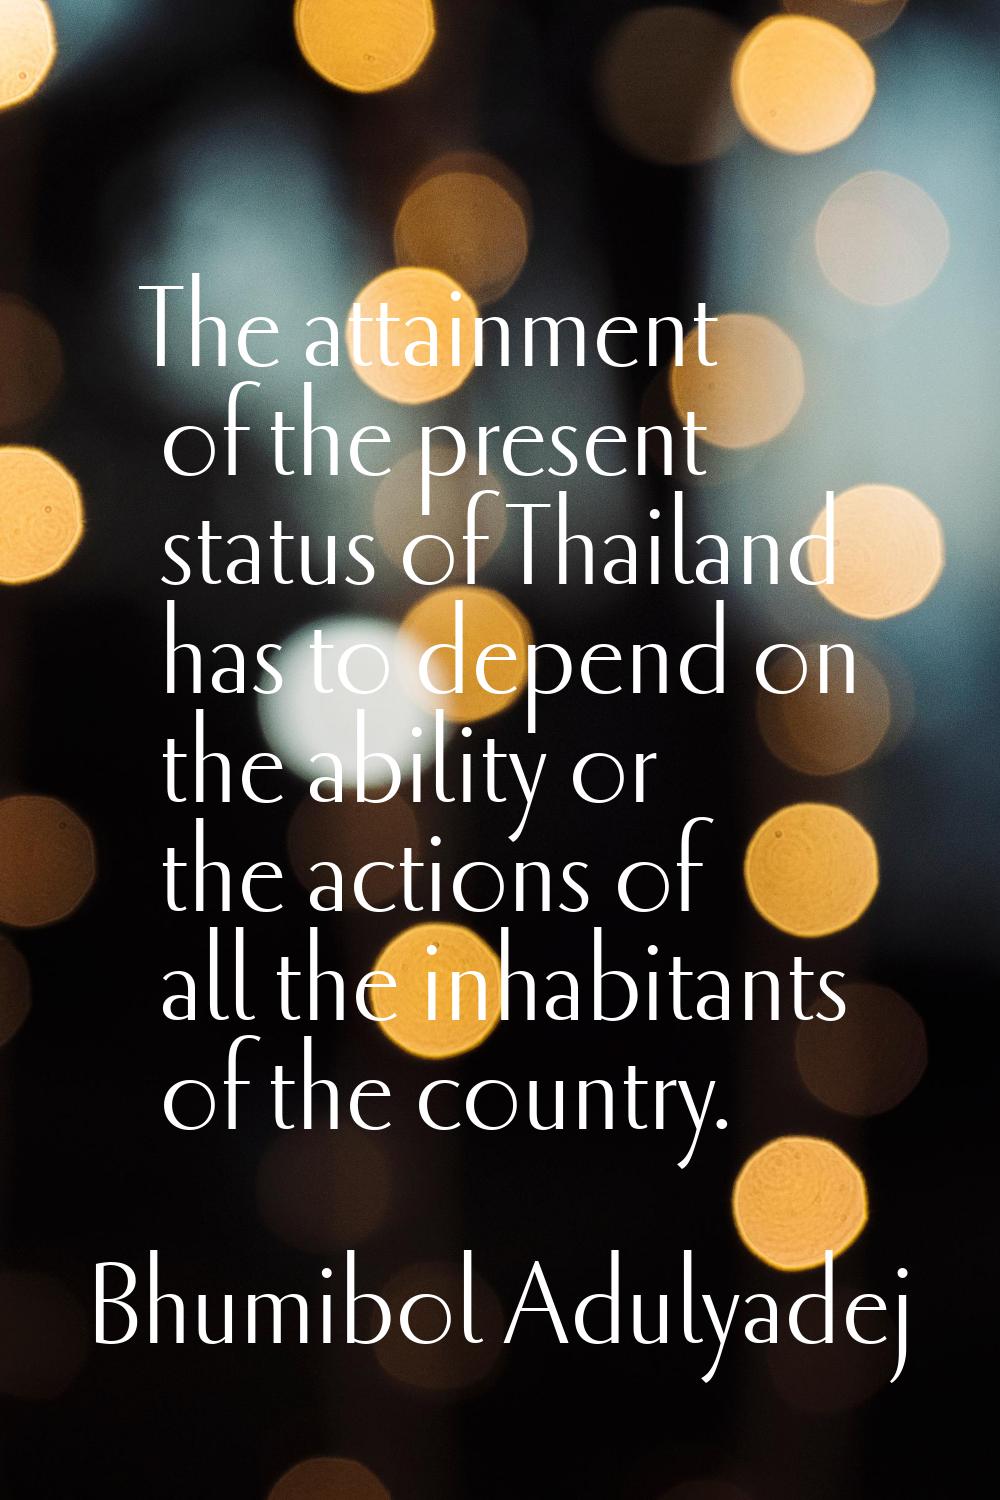 The attainment of the present status of Thailand has to depend on the ability or the actions of all